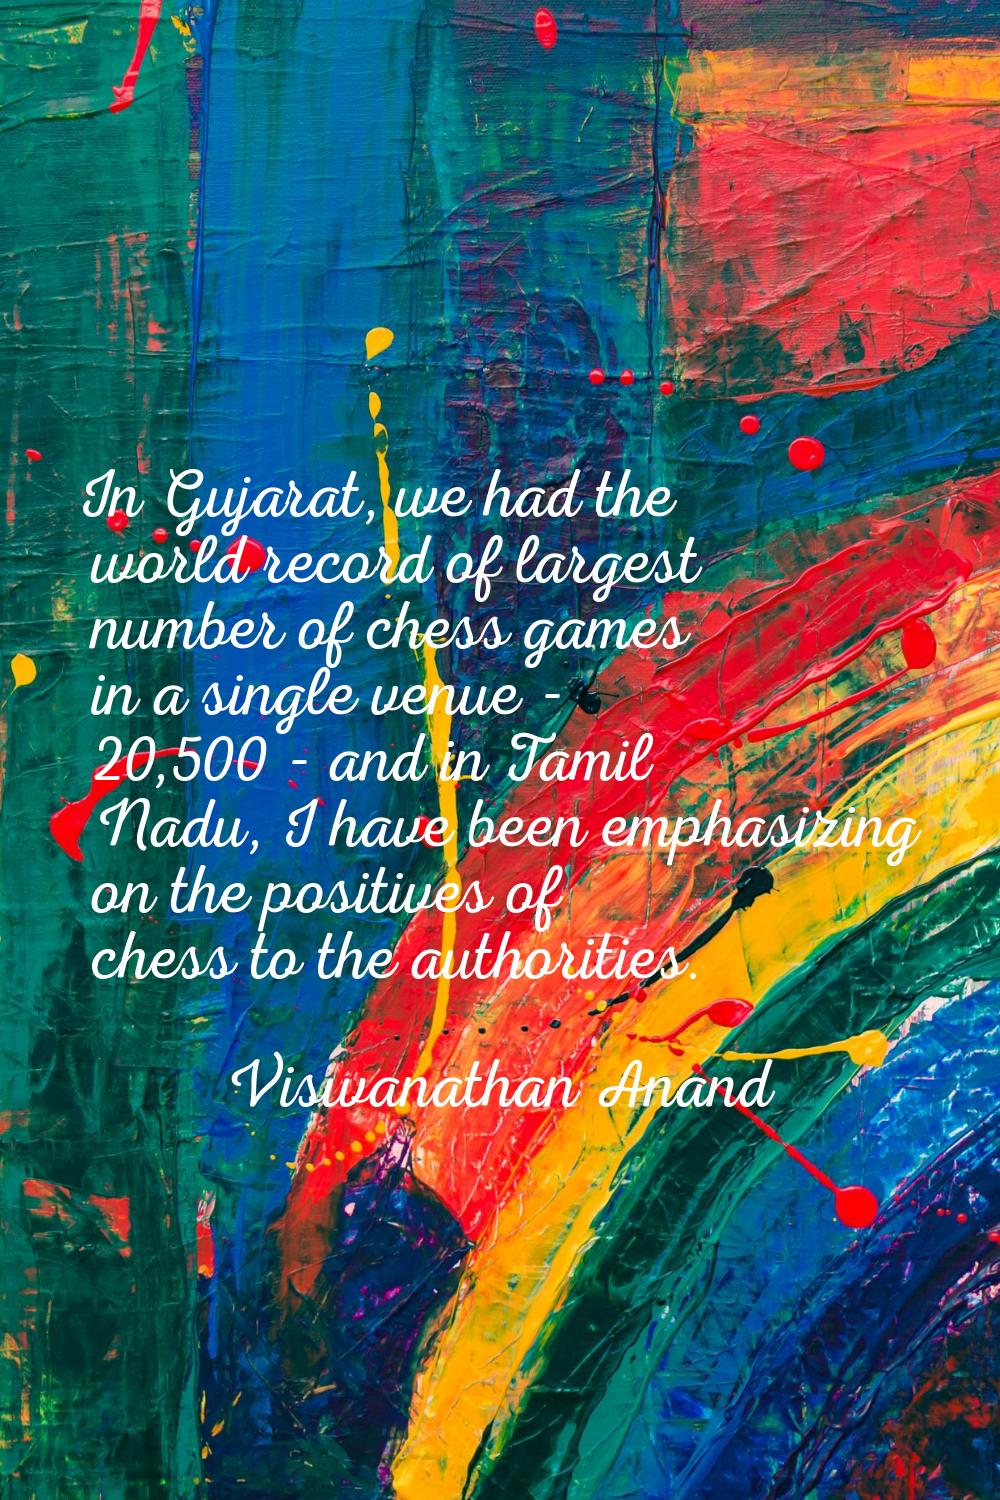 In Gujarat, we had the world record of largest number of chess games in a single venue - 20,500 - a